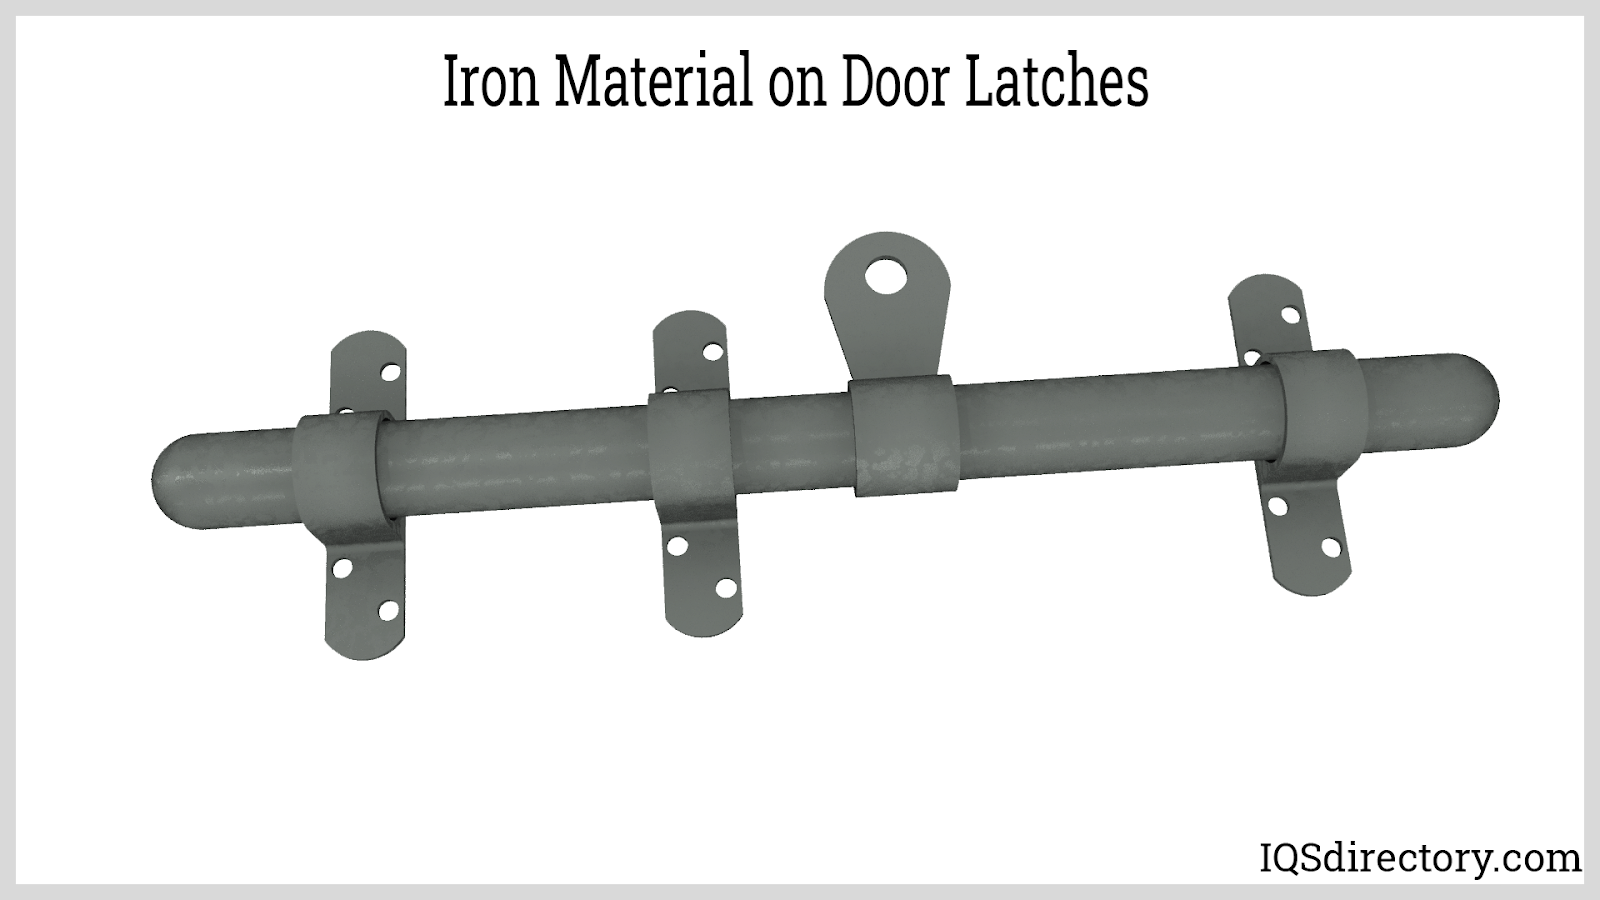 Iron Material on Door Latches